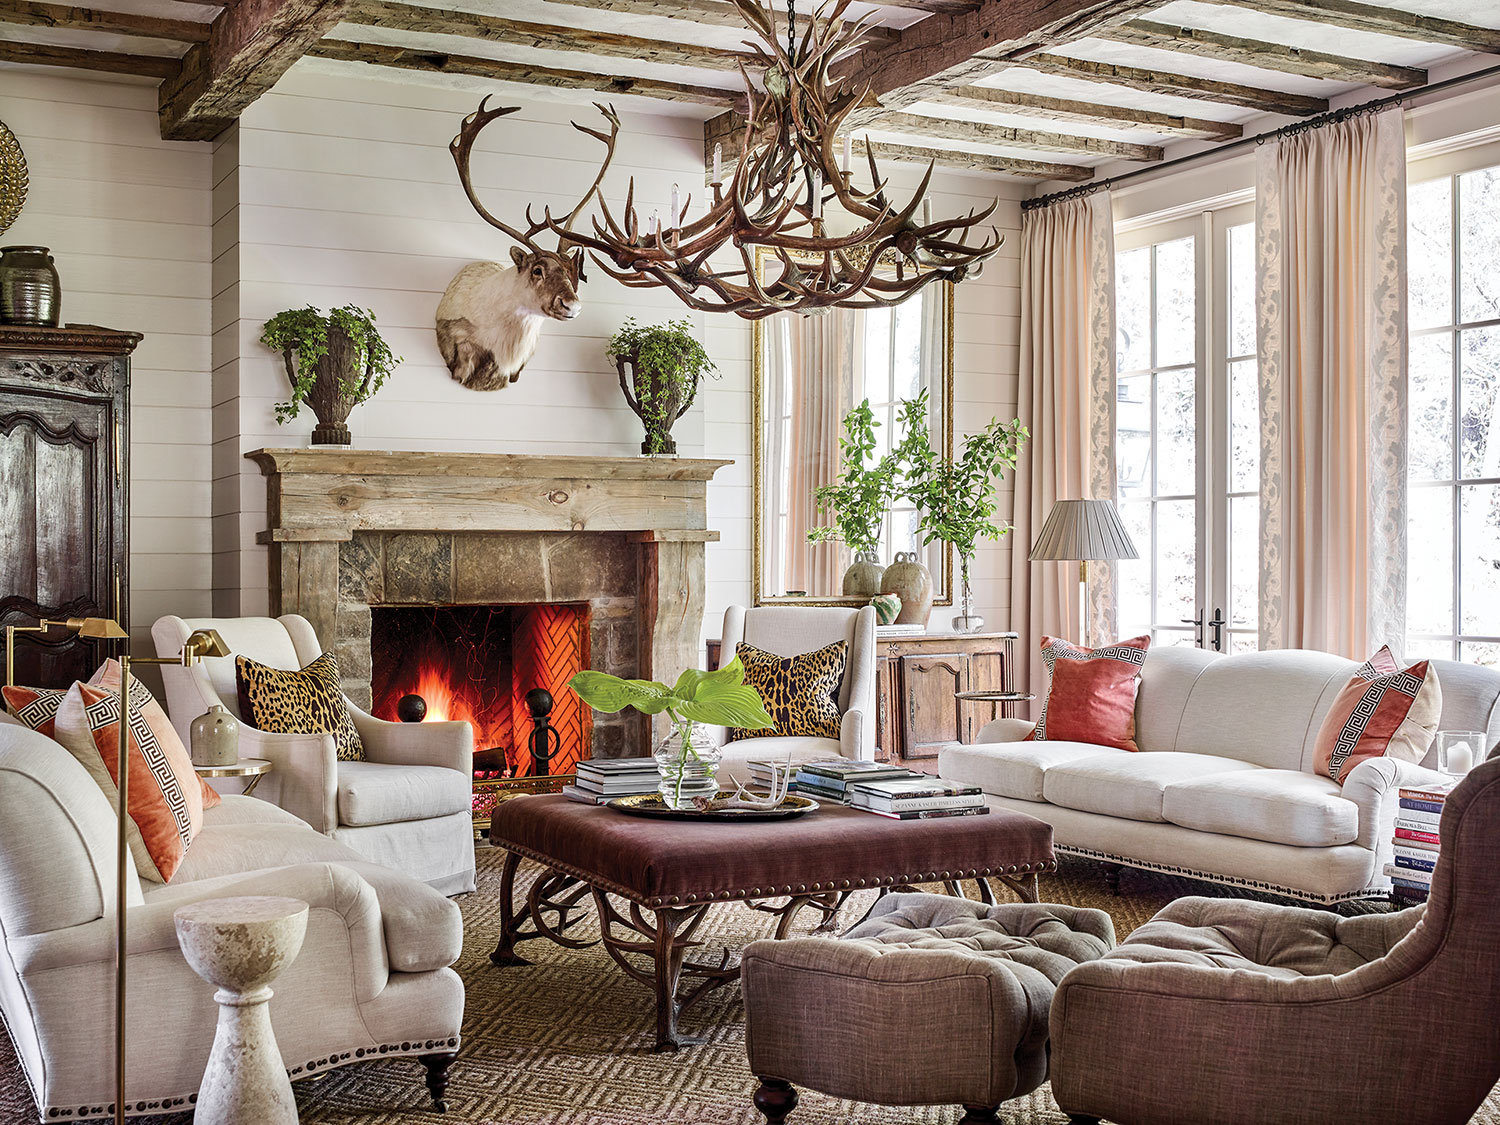 Mountain house design ideas from this scene include a large chandelier made of deer antlers, a pair of sofas and side chairs upholstered in a soft white fabric, and throw pillows, including (on each sofa) a pair of pillows in strié coral velvet inset with a Greek key pattern, as well as (on each side chair) an leopard-print linen pillow. One tufted, curved accent chair with a matching ottoman is upholstered in a dark brown linen-type fabric. At the center of the seating area is a large square coffee table upholstered in a dark, rich fabric. A neutral patterned area rug grounds the seating area. Arrangements of simple cut greenery on the mantel, coffee table, and console add a punch of color. Swing-arm floor lamps and stacks of books invite one to sit and read by the fire. Soft white shiplap walls and curtains keep the room light and airy.